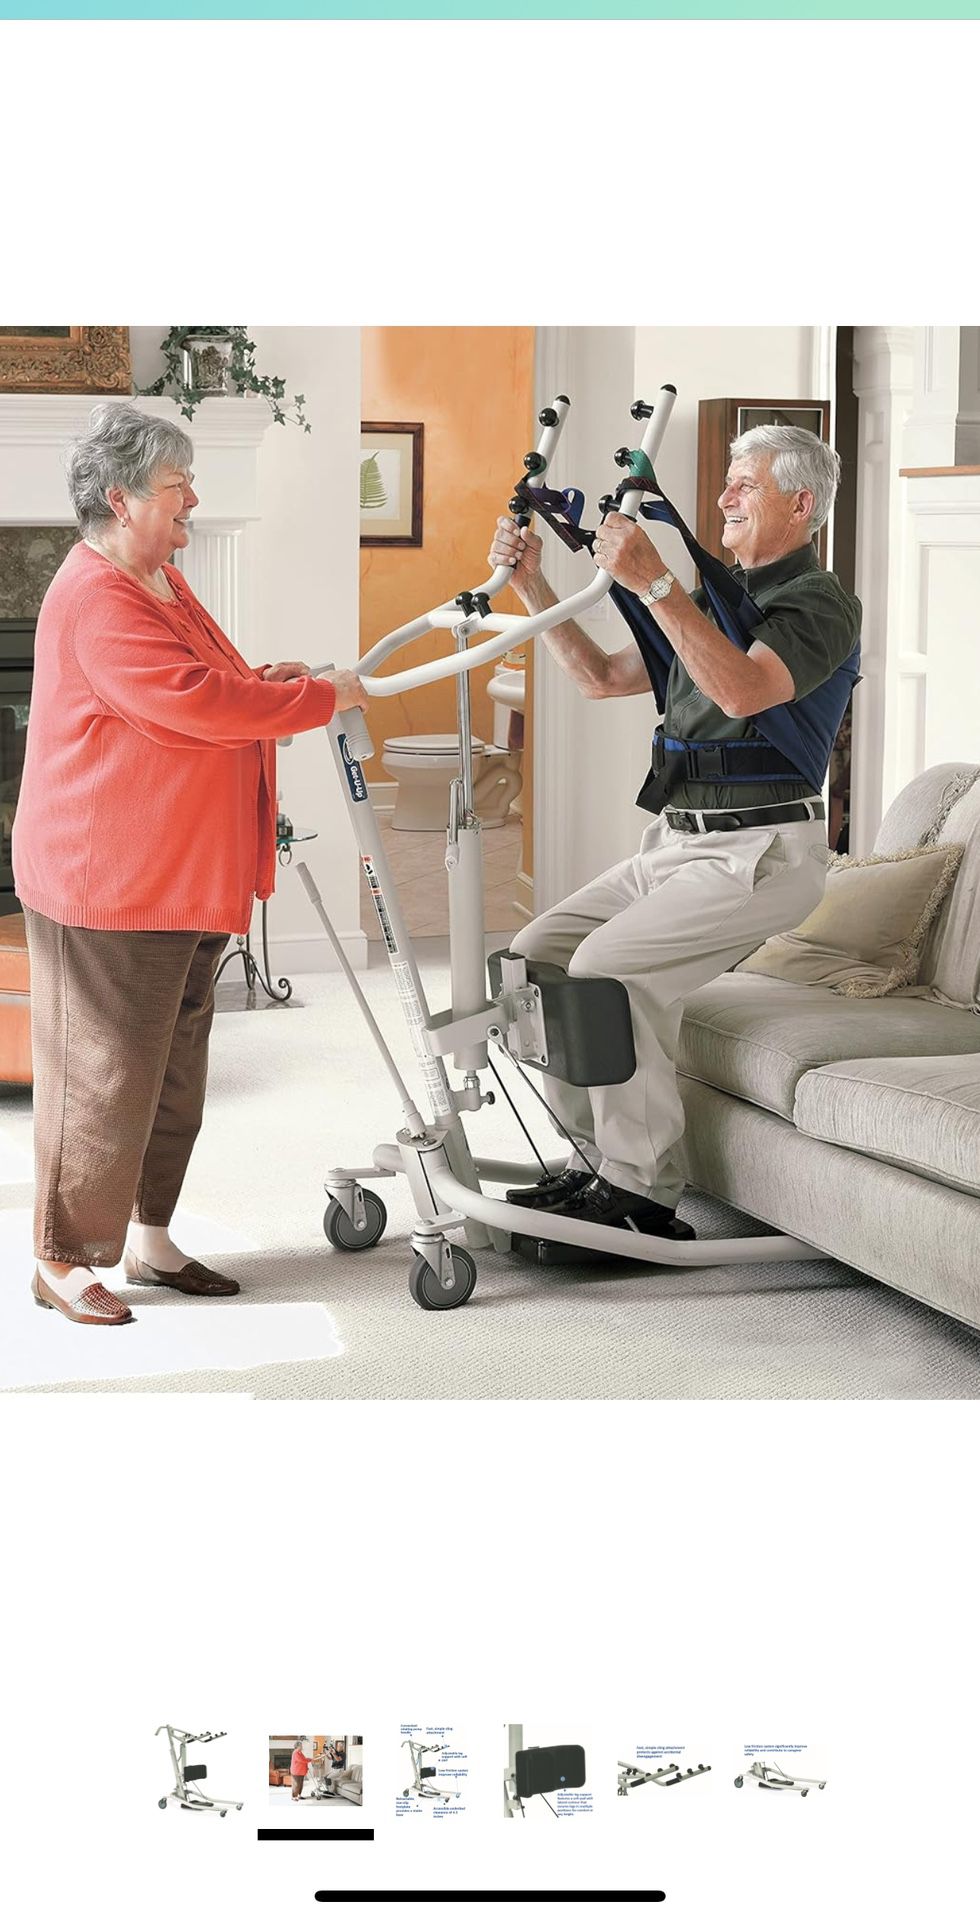 Hydraulic Stand-up Lift For Elderly 